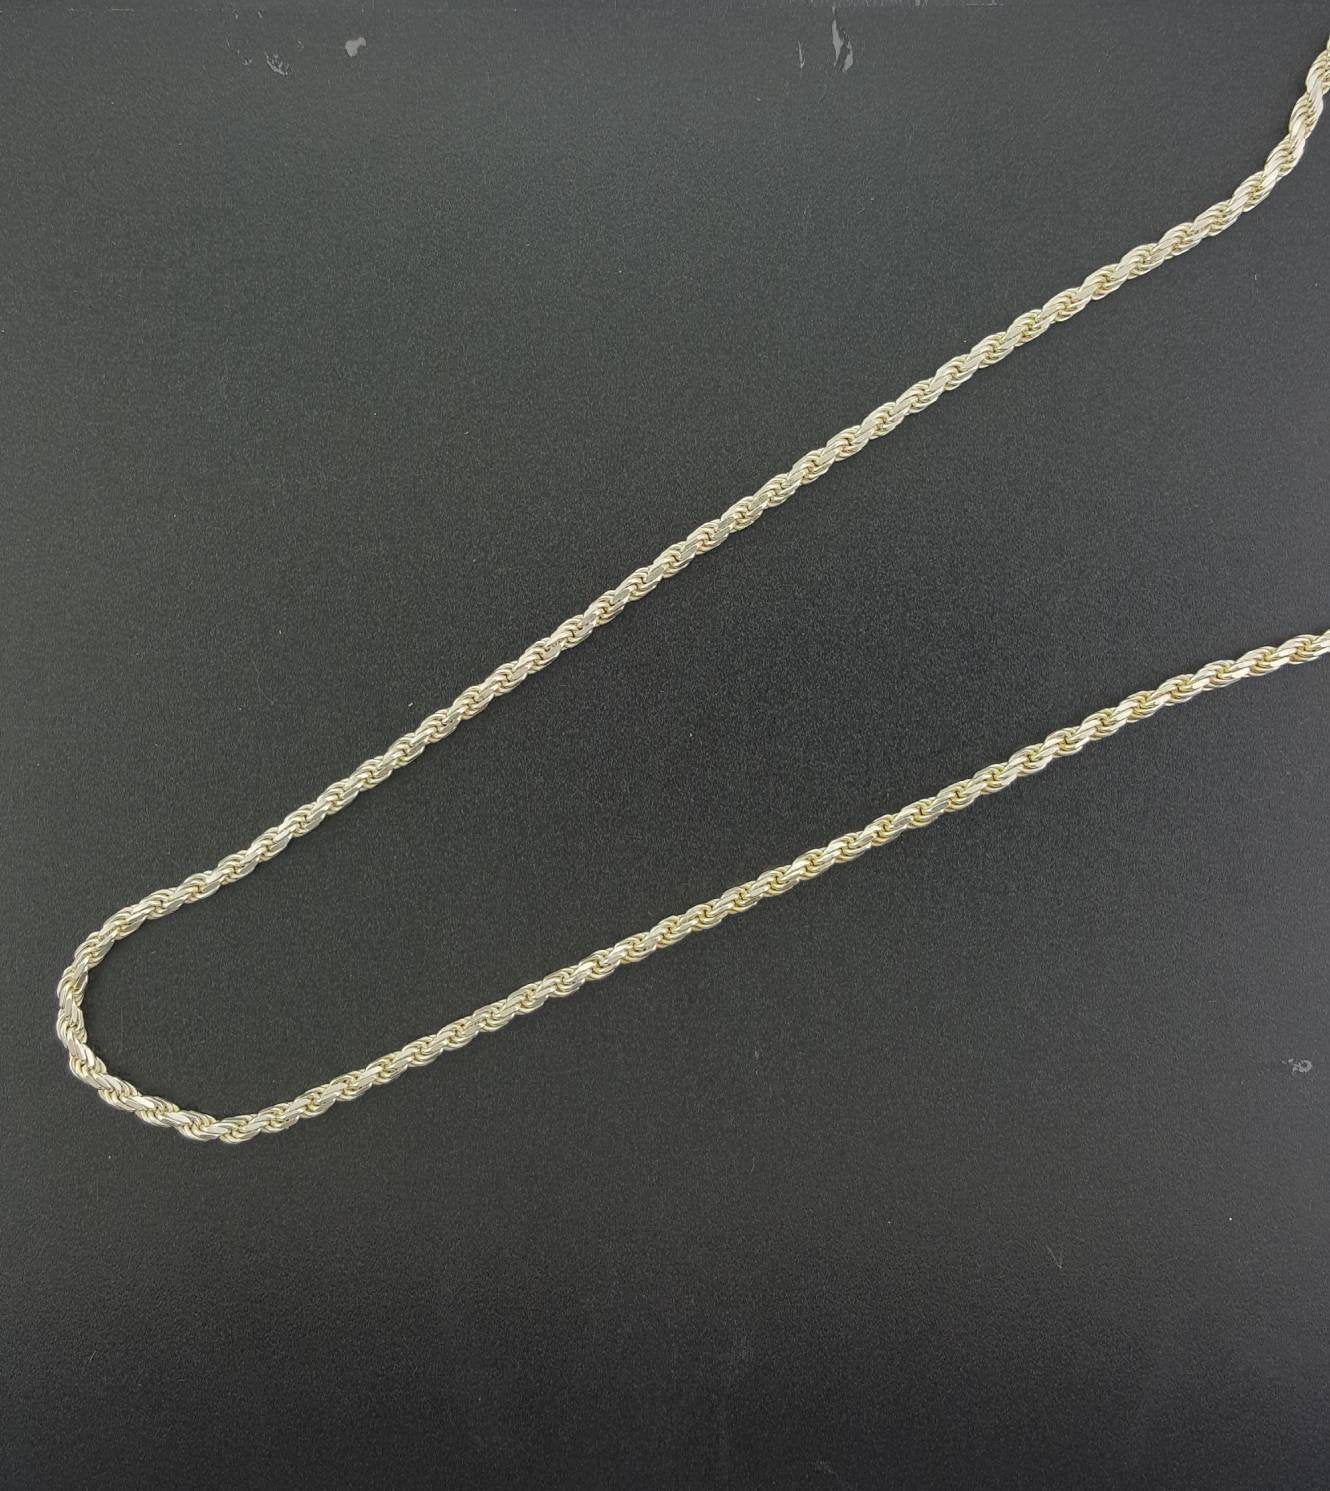 18, 20, 22, 24 inches Sterling silver men's necklace chain